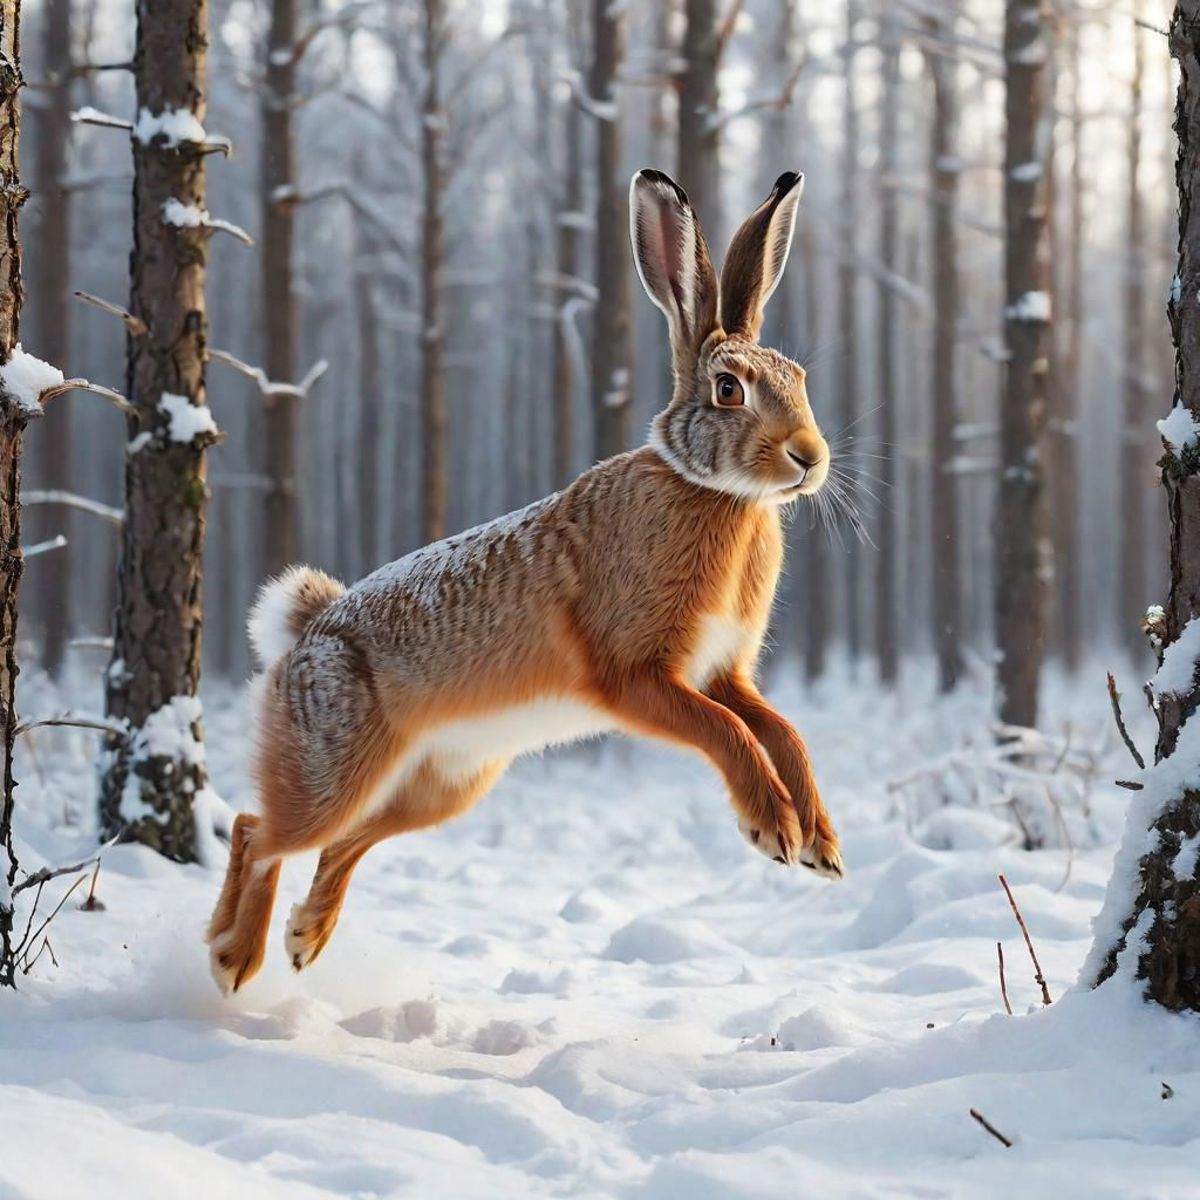 A snow-covered forest with a brown rabbit jumping in the air.